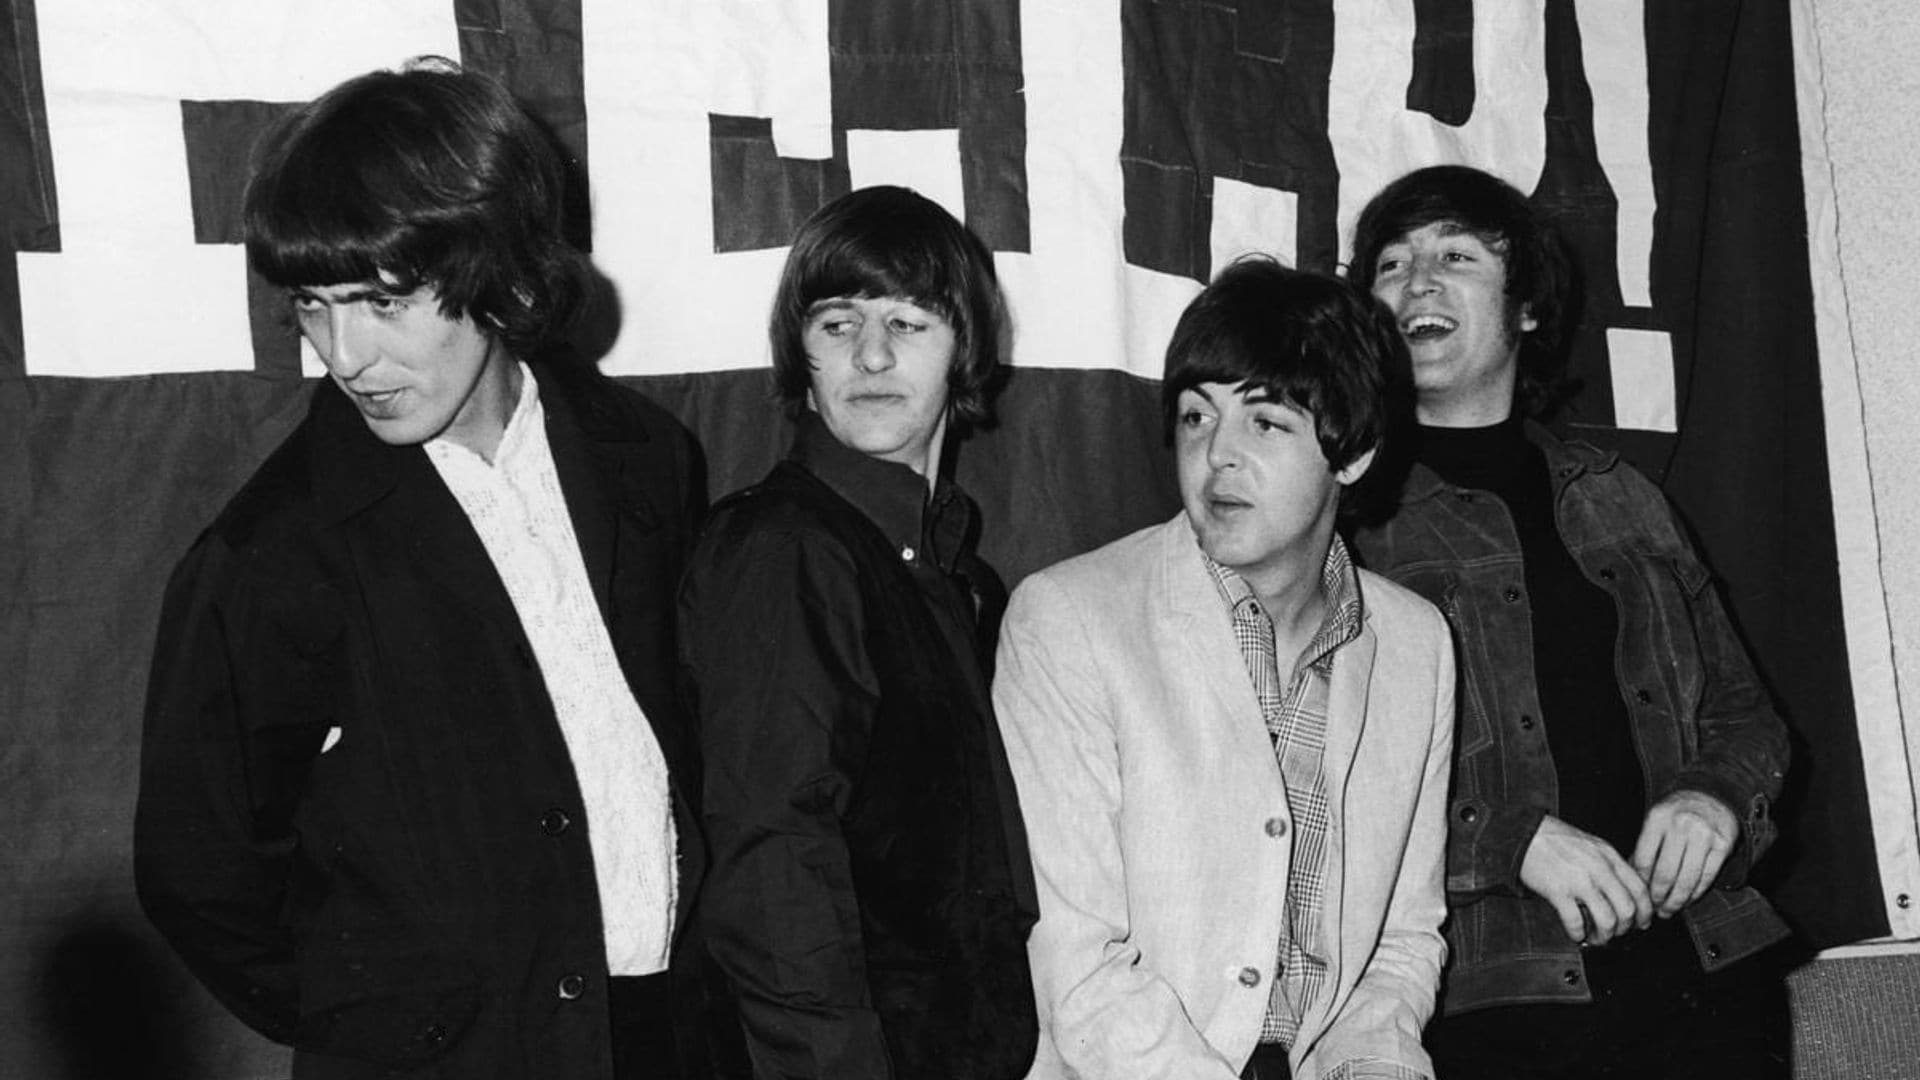 The Beatles Biopic: The actors rumored to portray the Fab Four